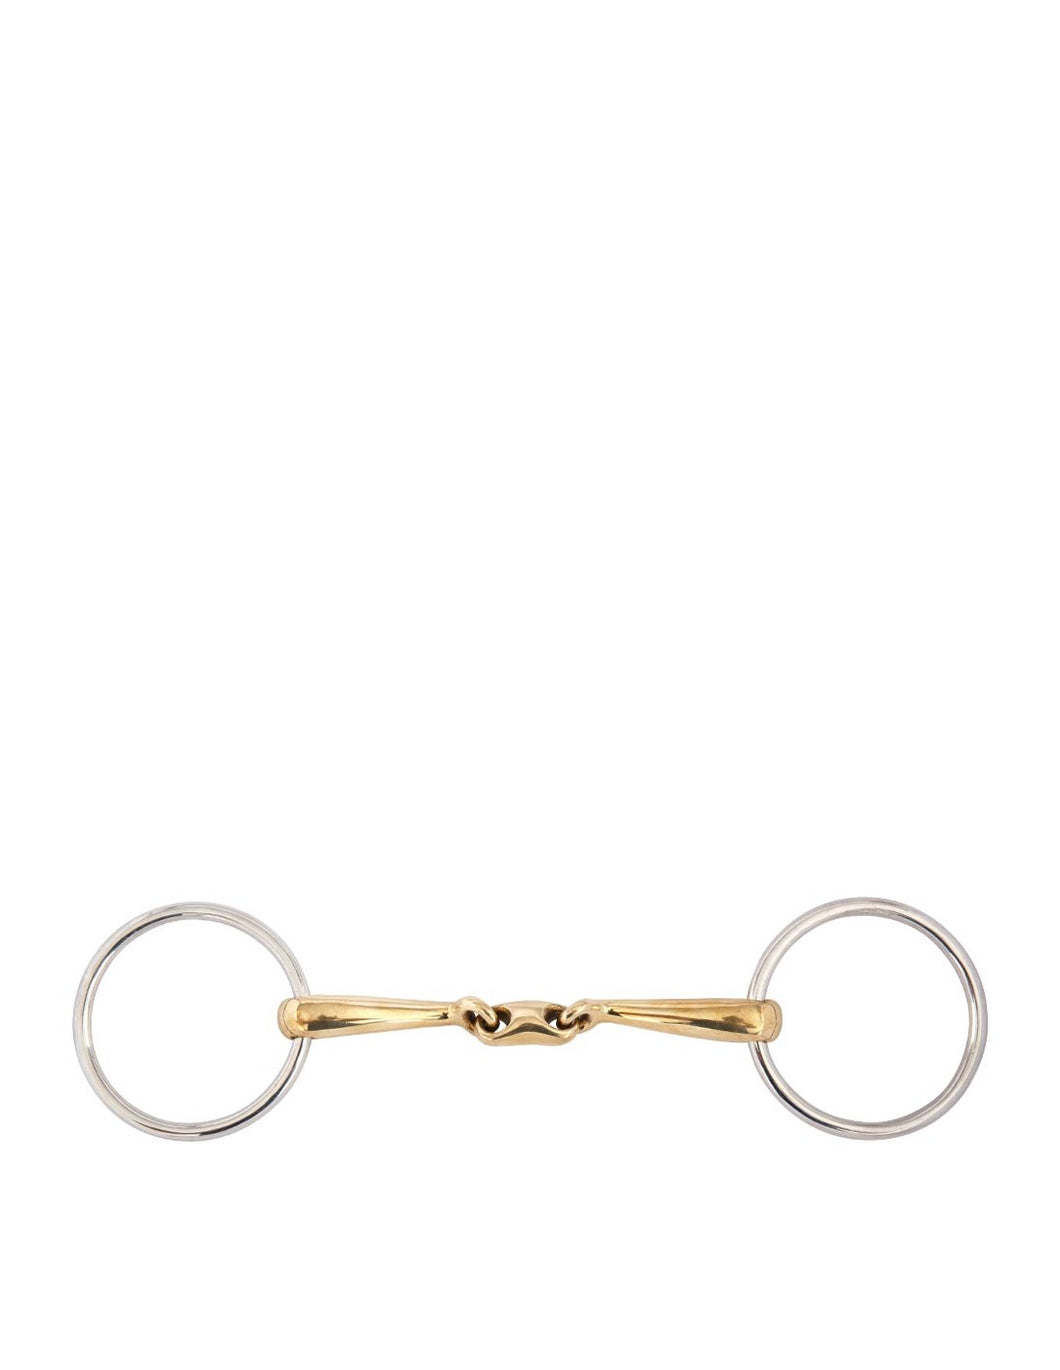 BR Double Jointed Loose Ring Snaffle Slightly Curved Soft Contact